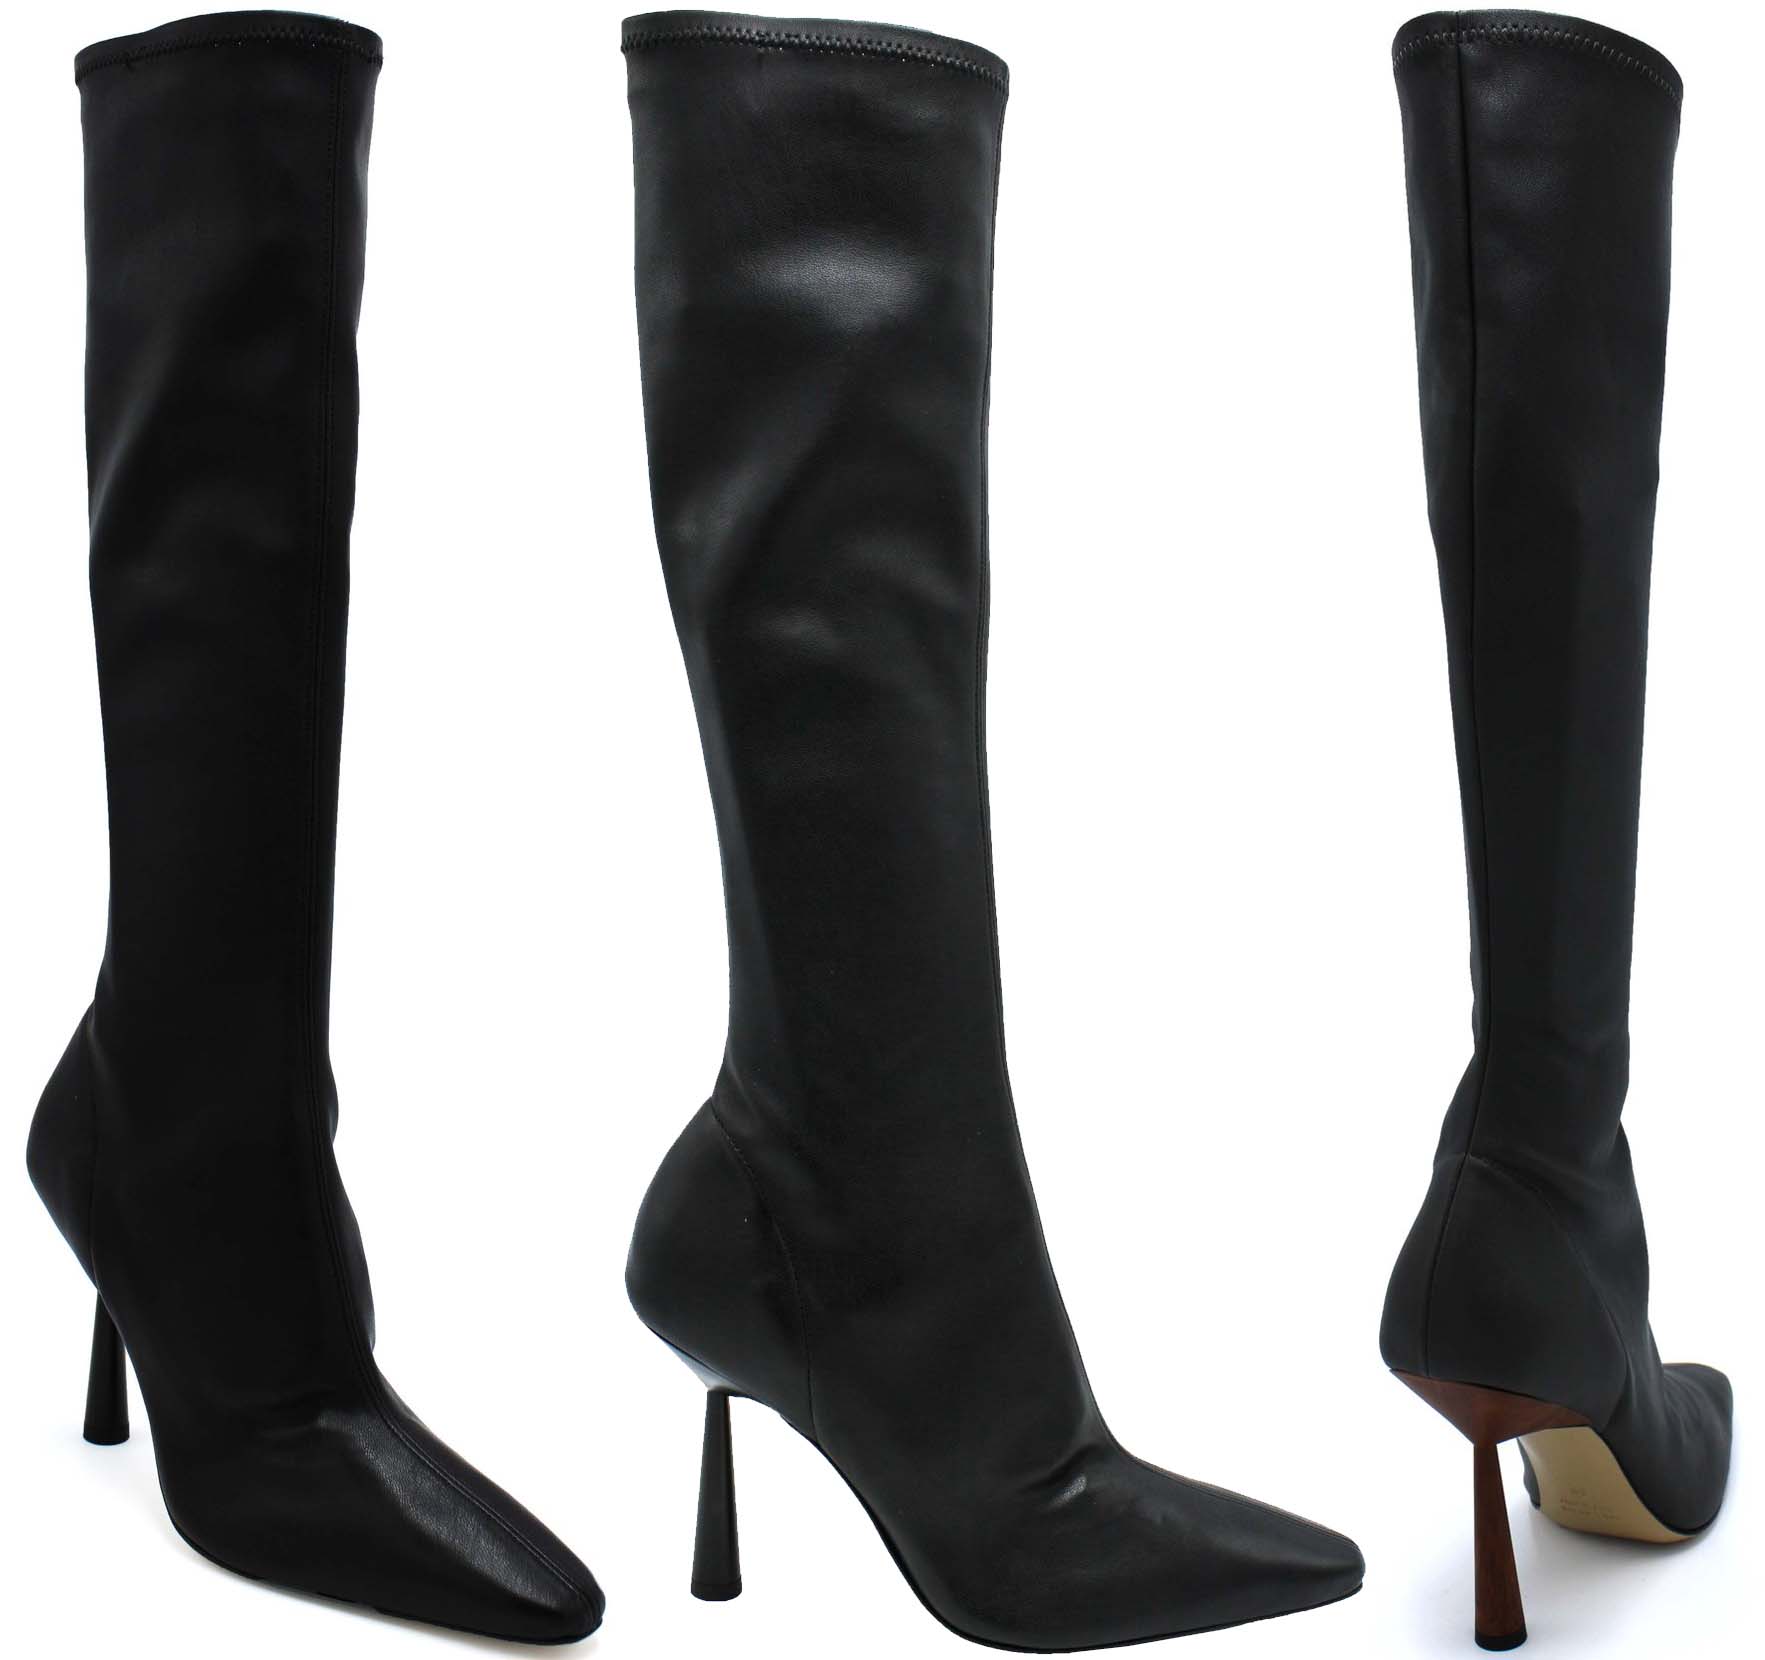 The Rosie 8 knee-high boots are part of Rosie Huntington-Whiteley's new collection with Gia Borghini